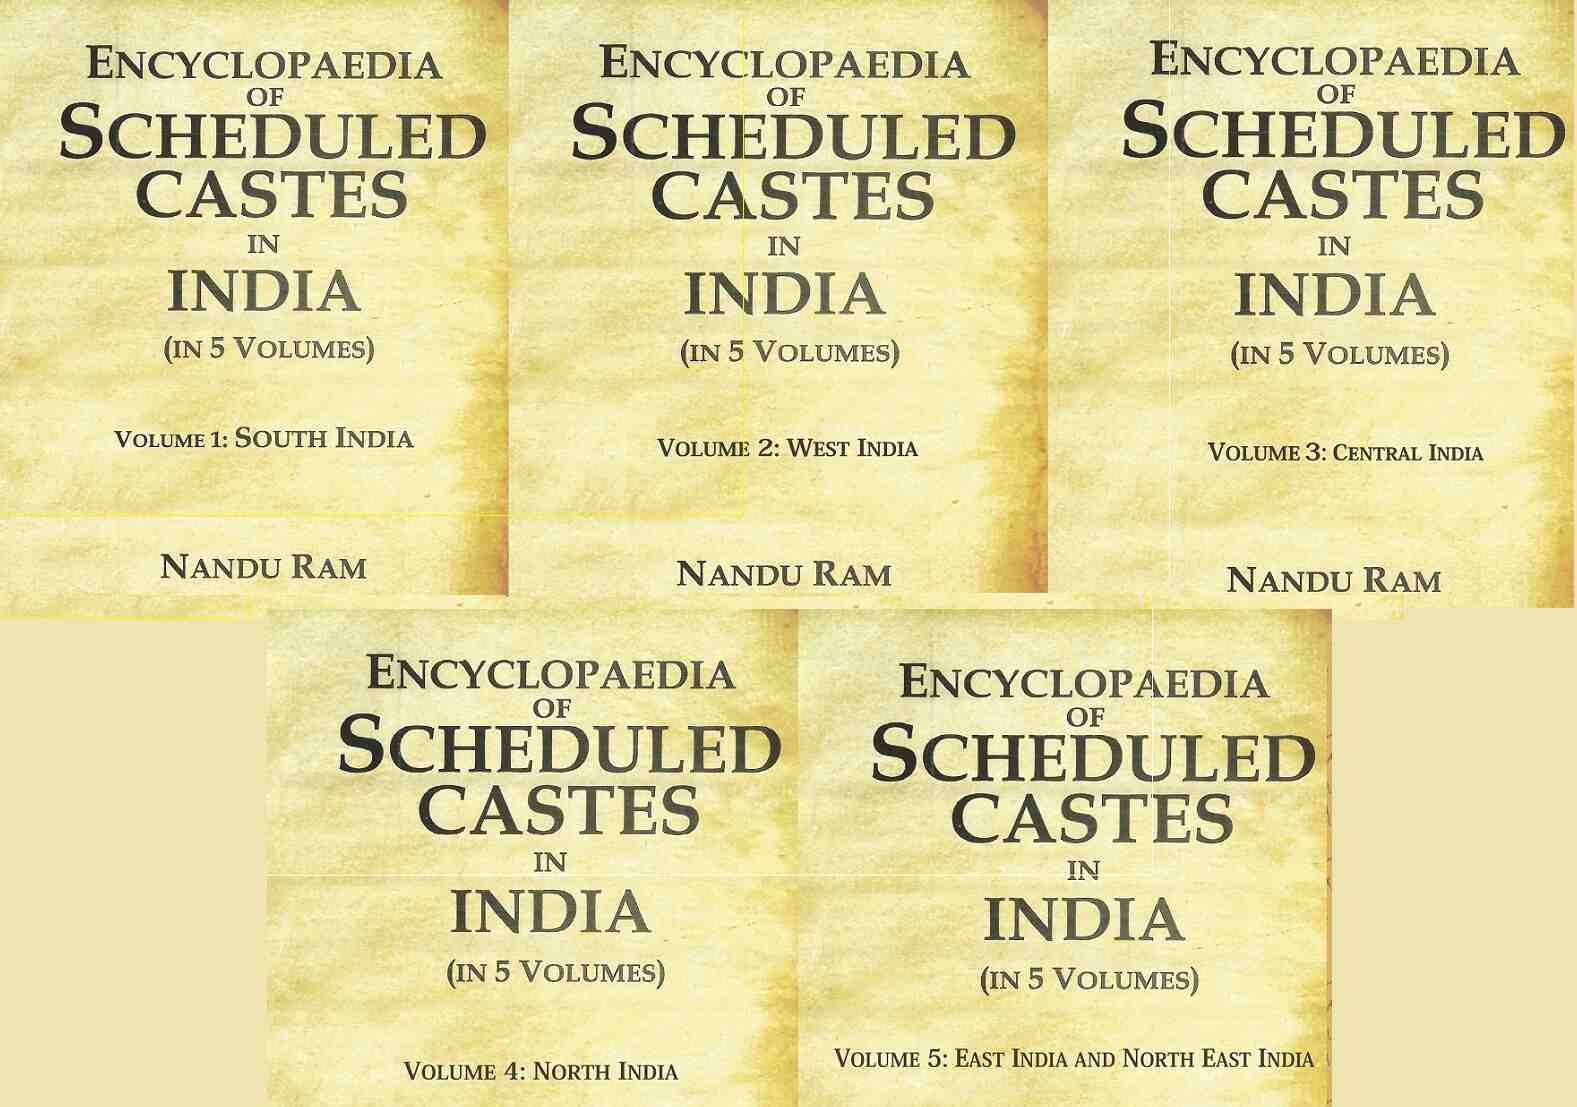 Encyclopaedia of Scheduled Castes in India